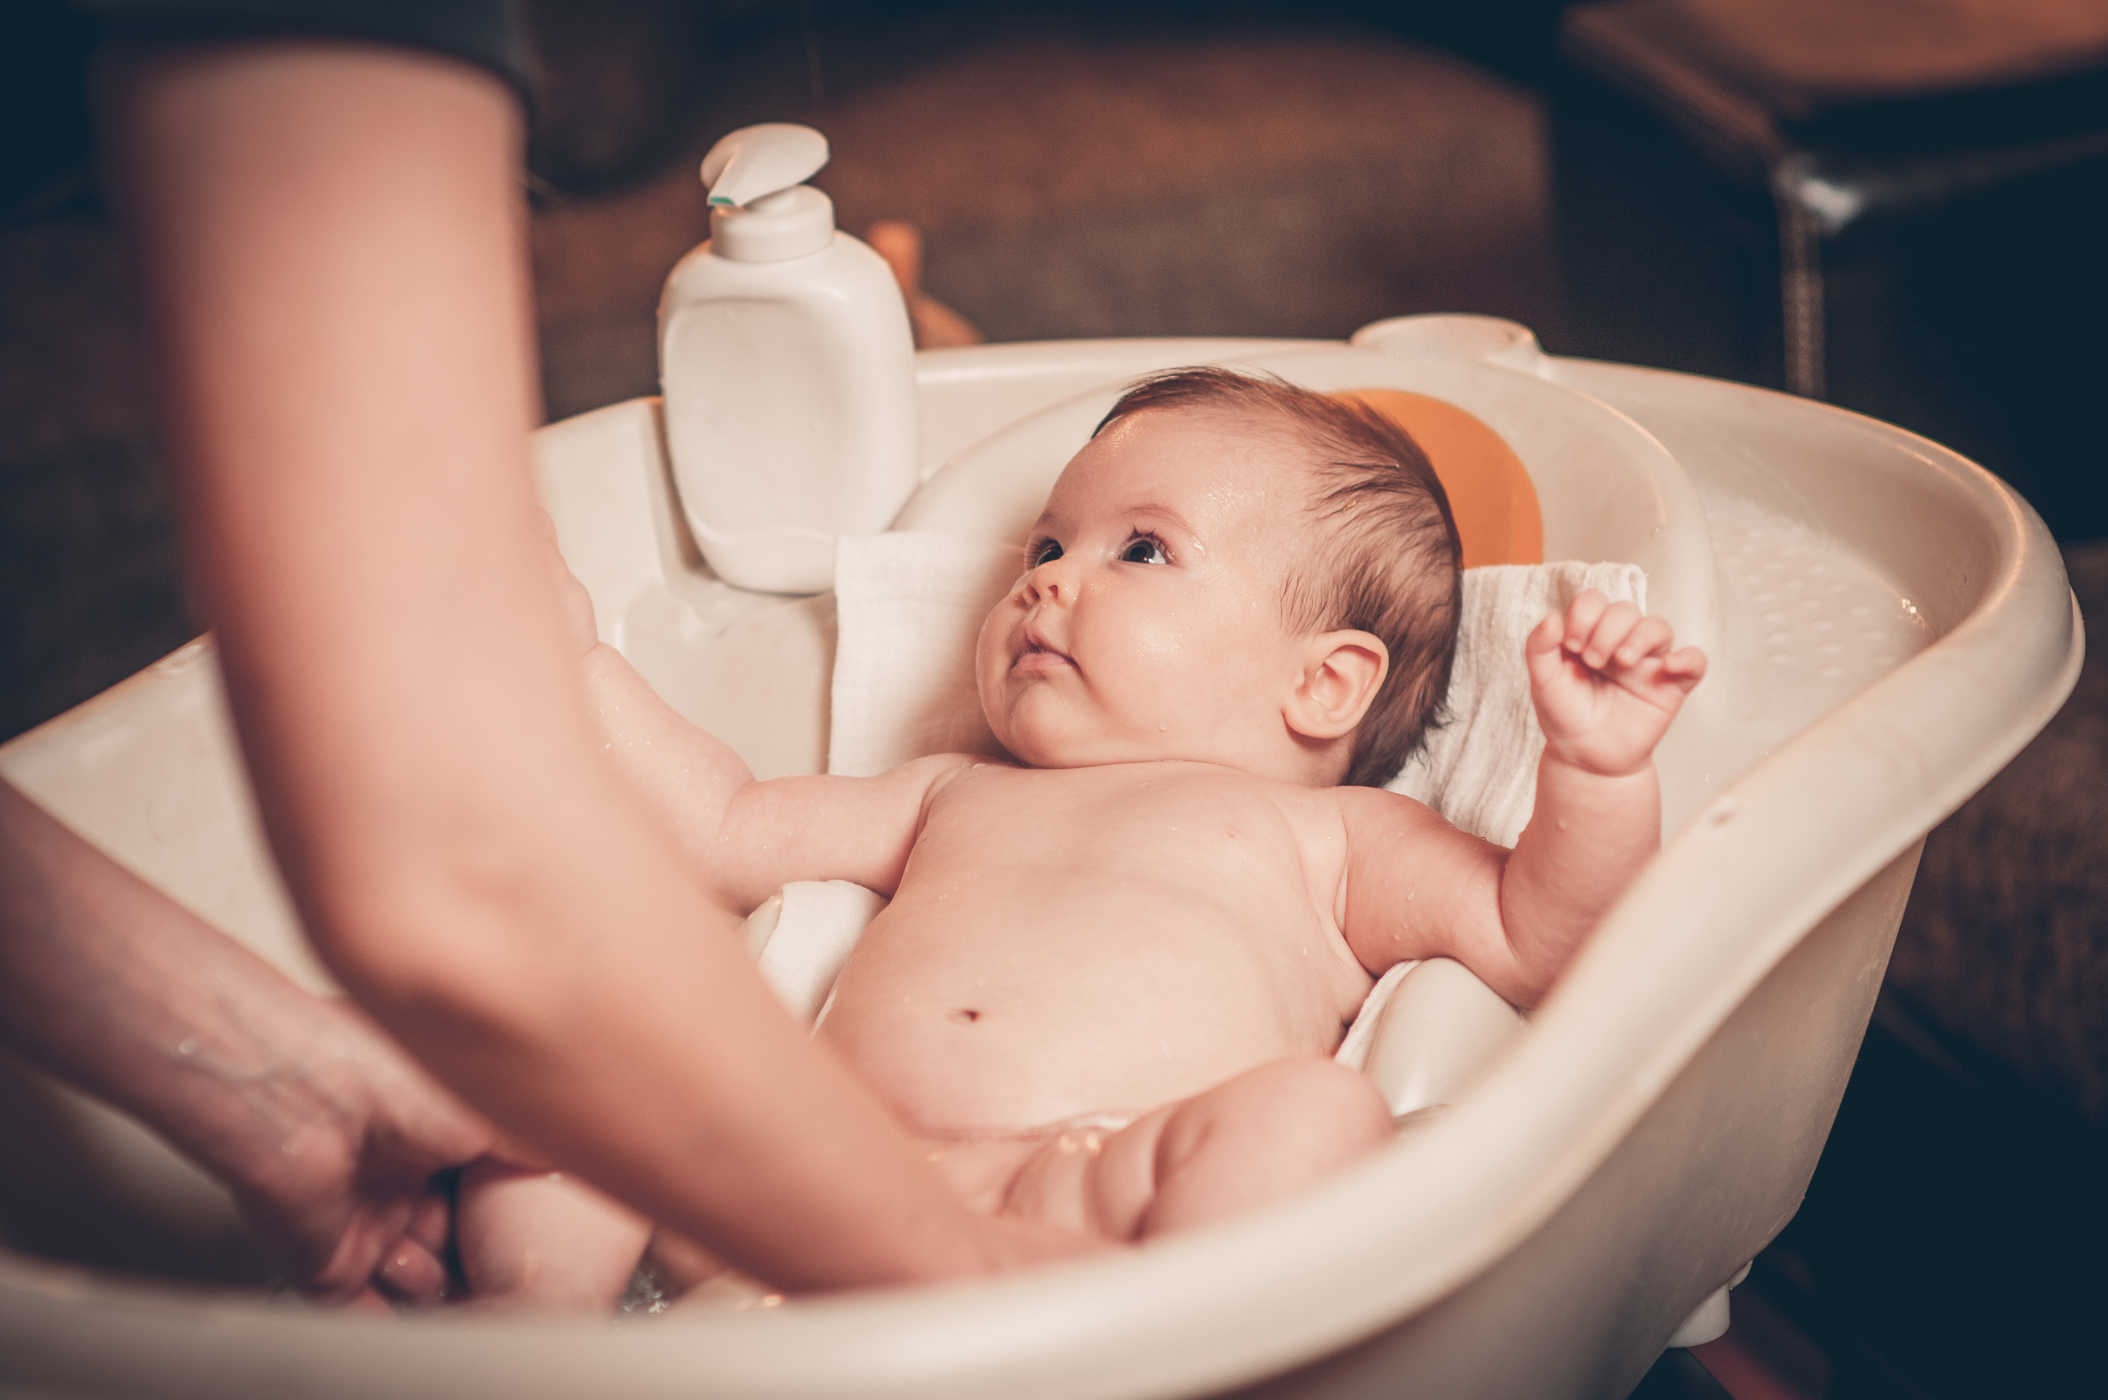 The way to bathe babies properly